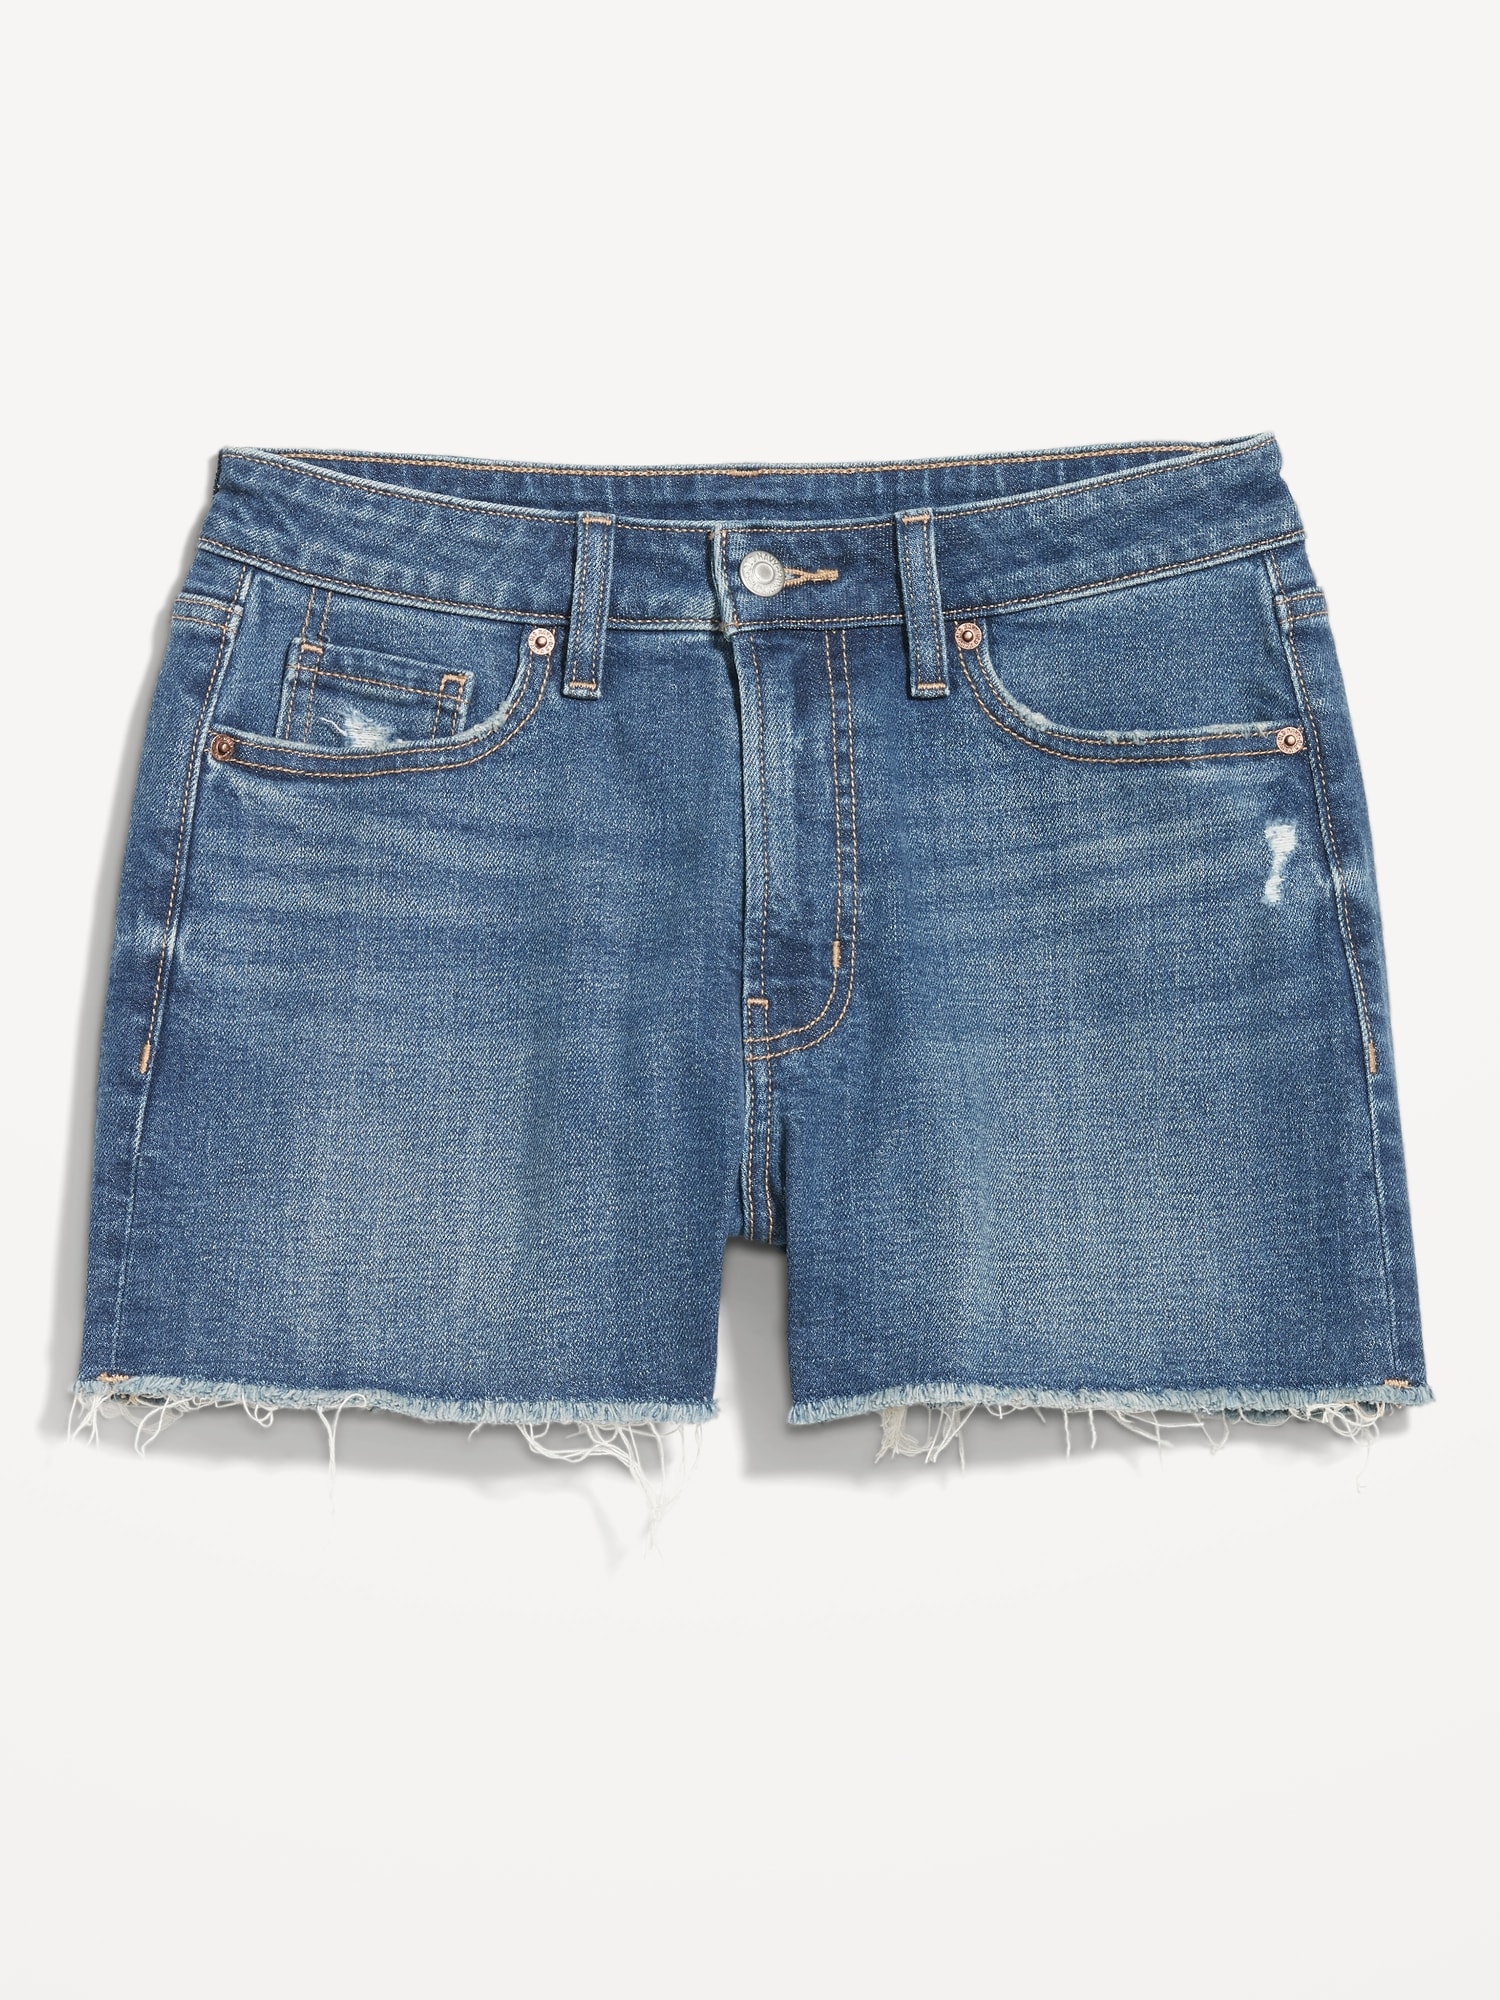 Higher High-Waisted Sky-Hi A-Line Cut-Off Workwear Jean Shorts for Women --  3-inch inseam